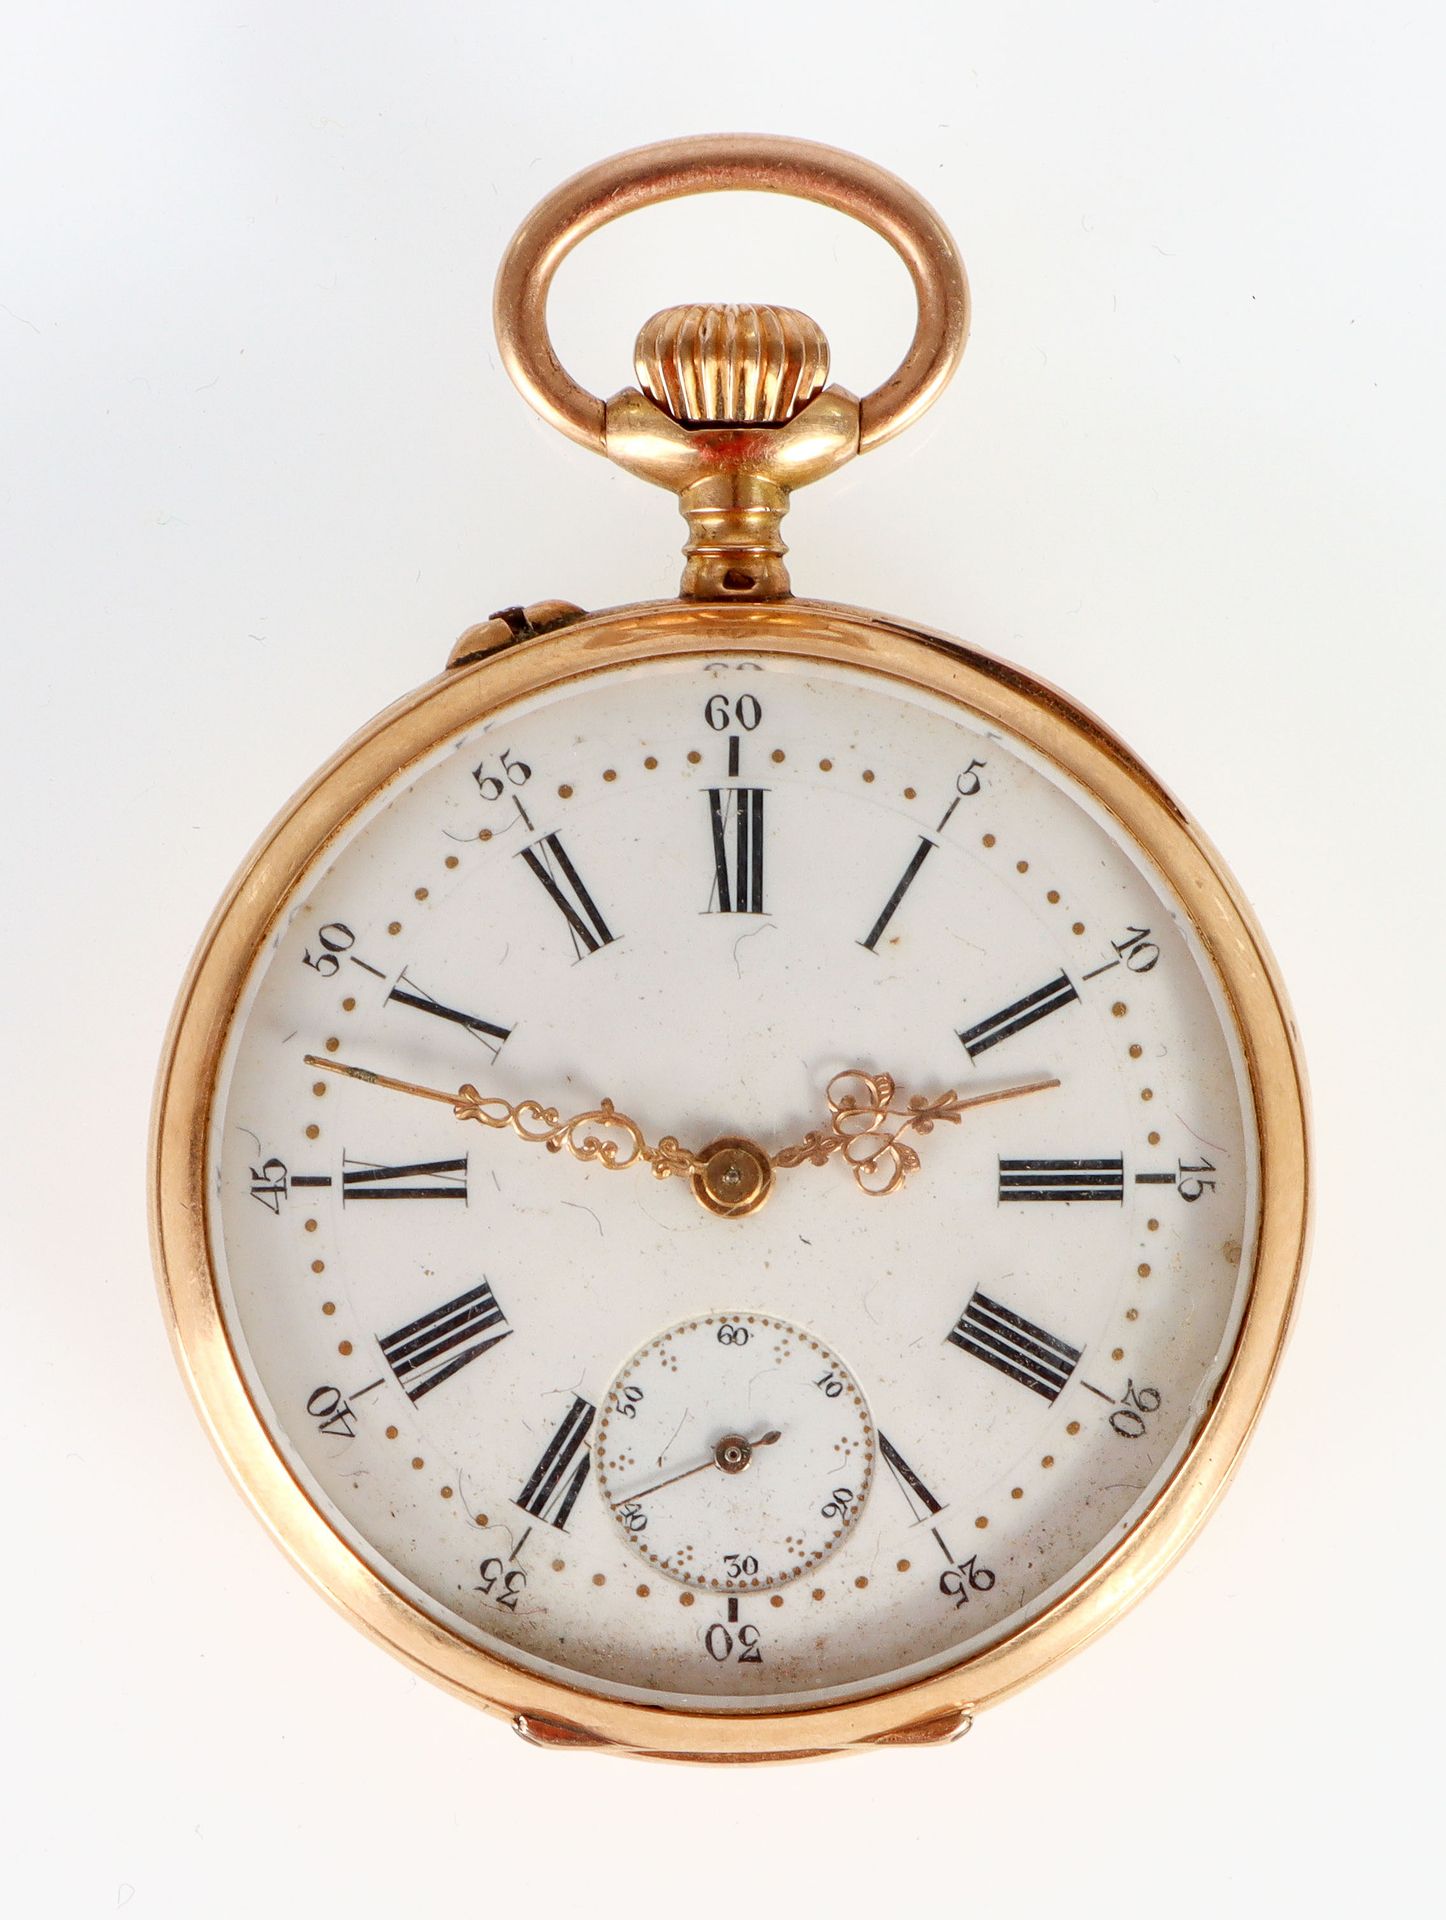 Null Gold pocket watch. Enameled dial with Roman numerals. Gross weight: 63.7 g